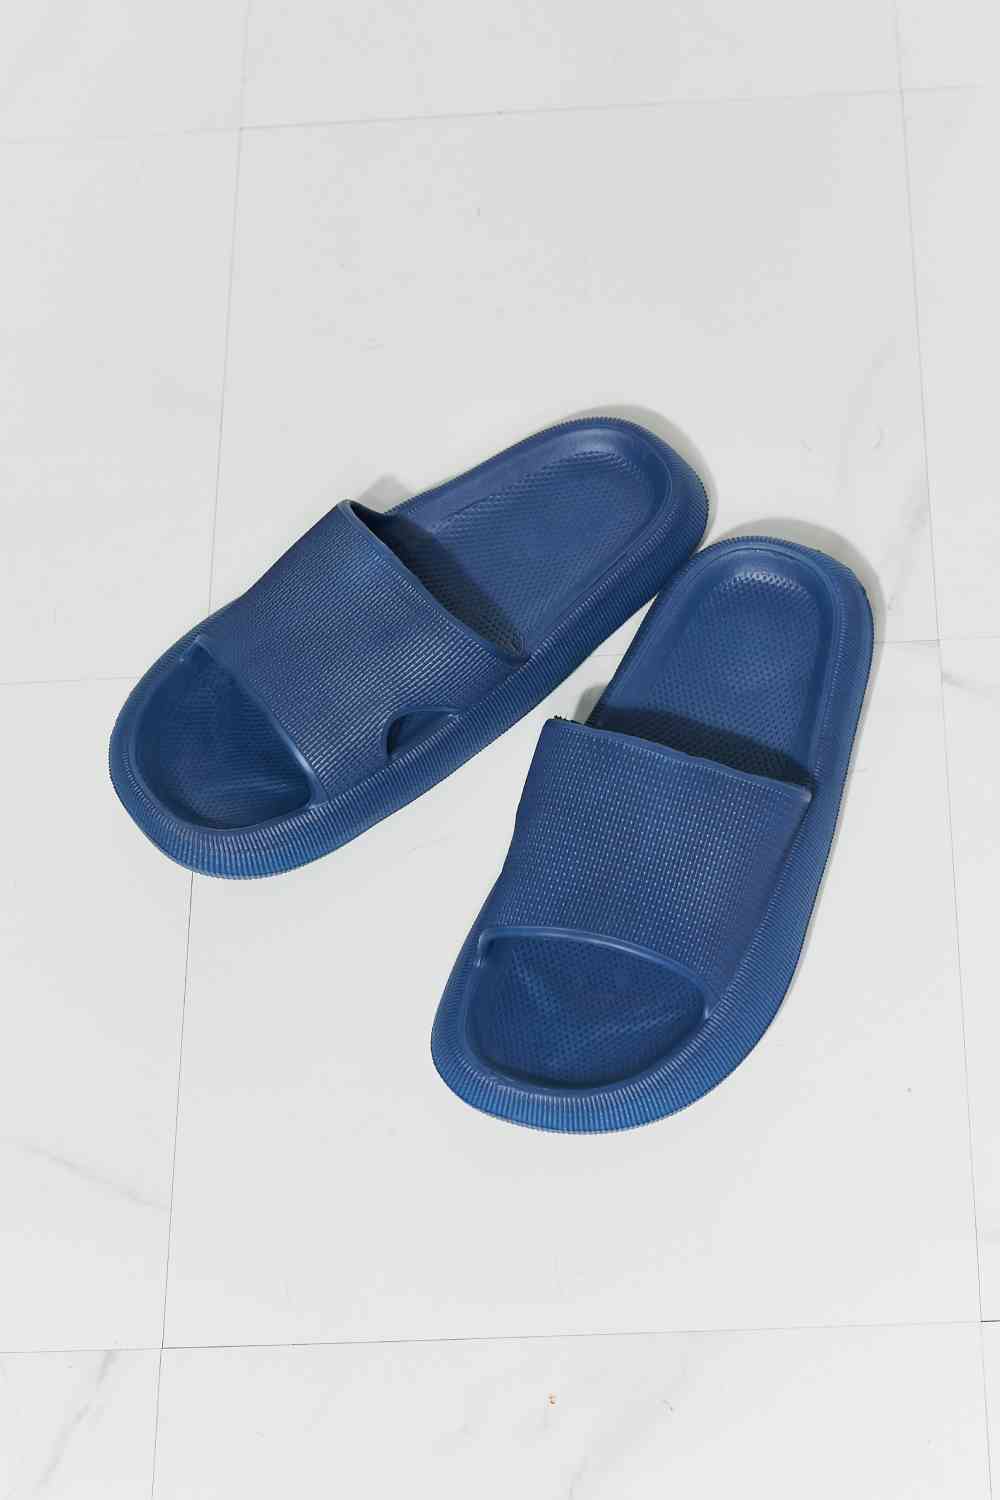 Arms Around Me Open Toe Slide in Navy - Accessories - Shoes - 5 - 2024